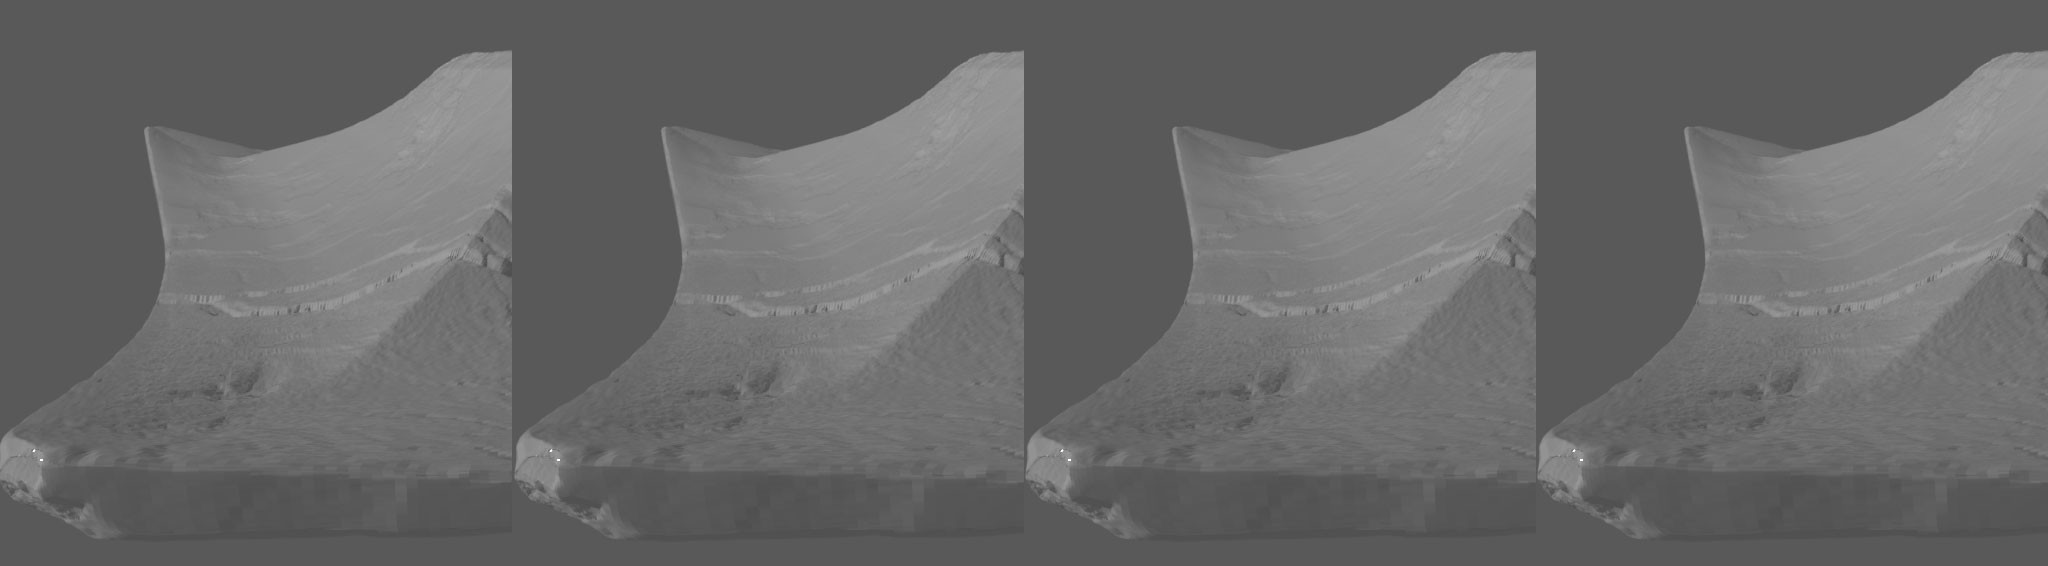 highres sculpt for comparison with below. Note the sharp edges get lost e.g. the damaged corner